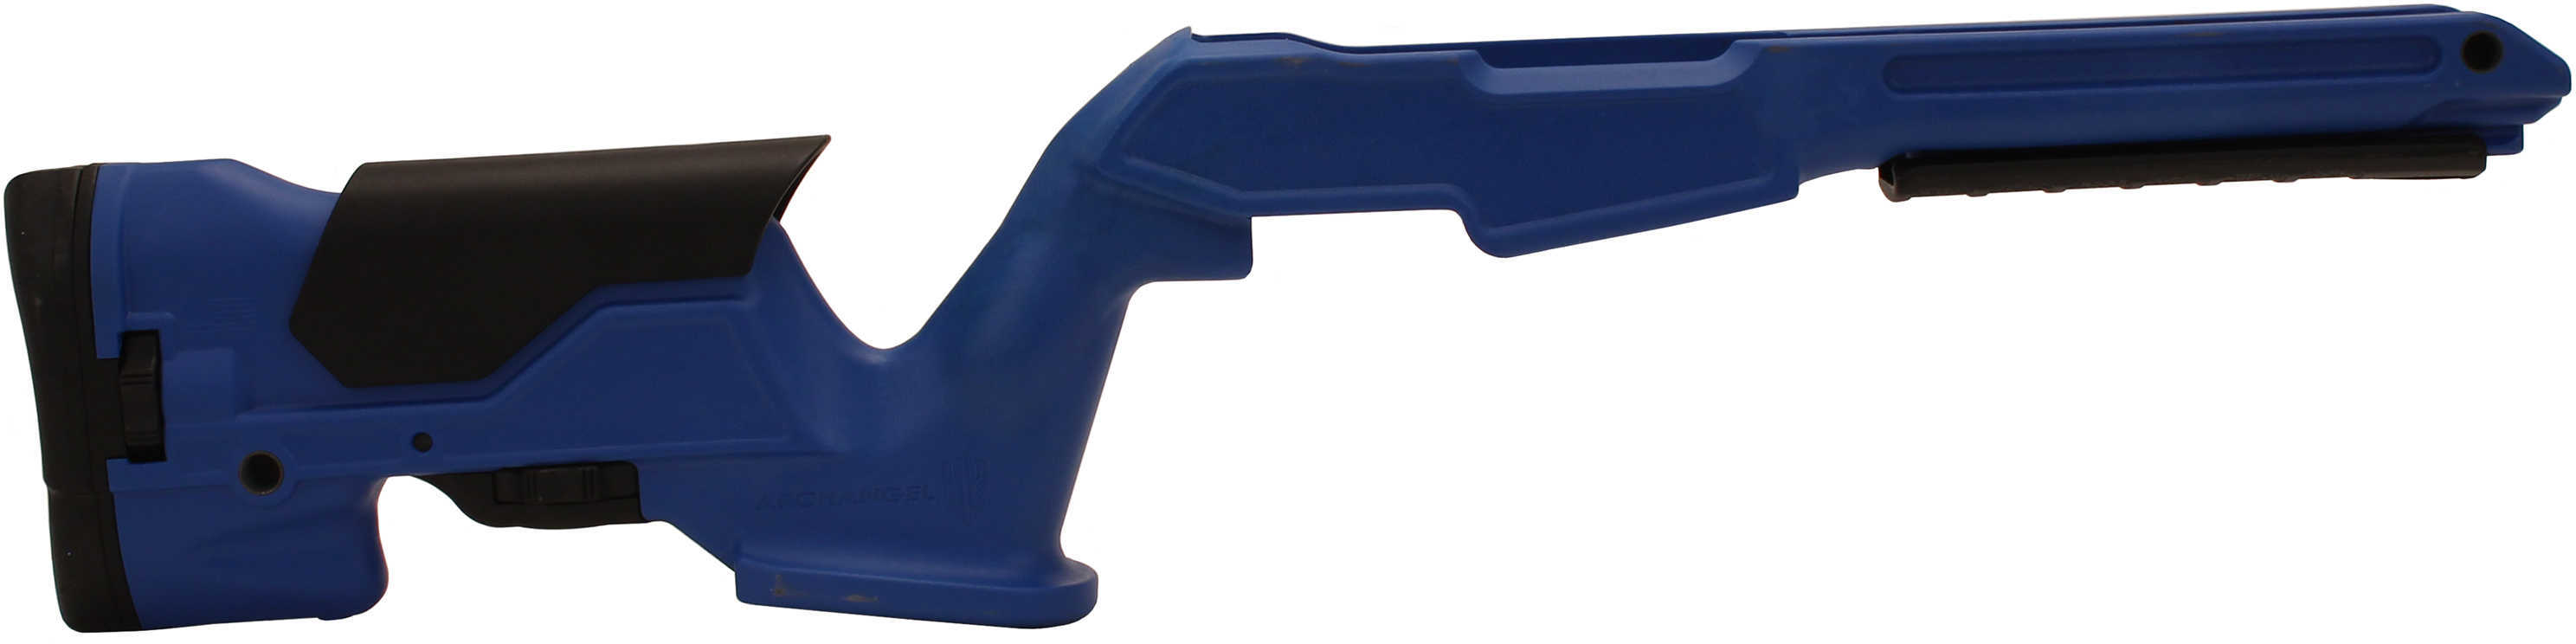 ProMag Archangel Ruger 10/22 Precision Stock Bullseye Blue Technapolymer Md: AAP1022-BB